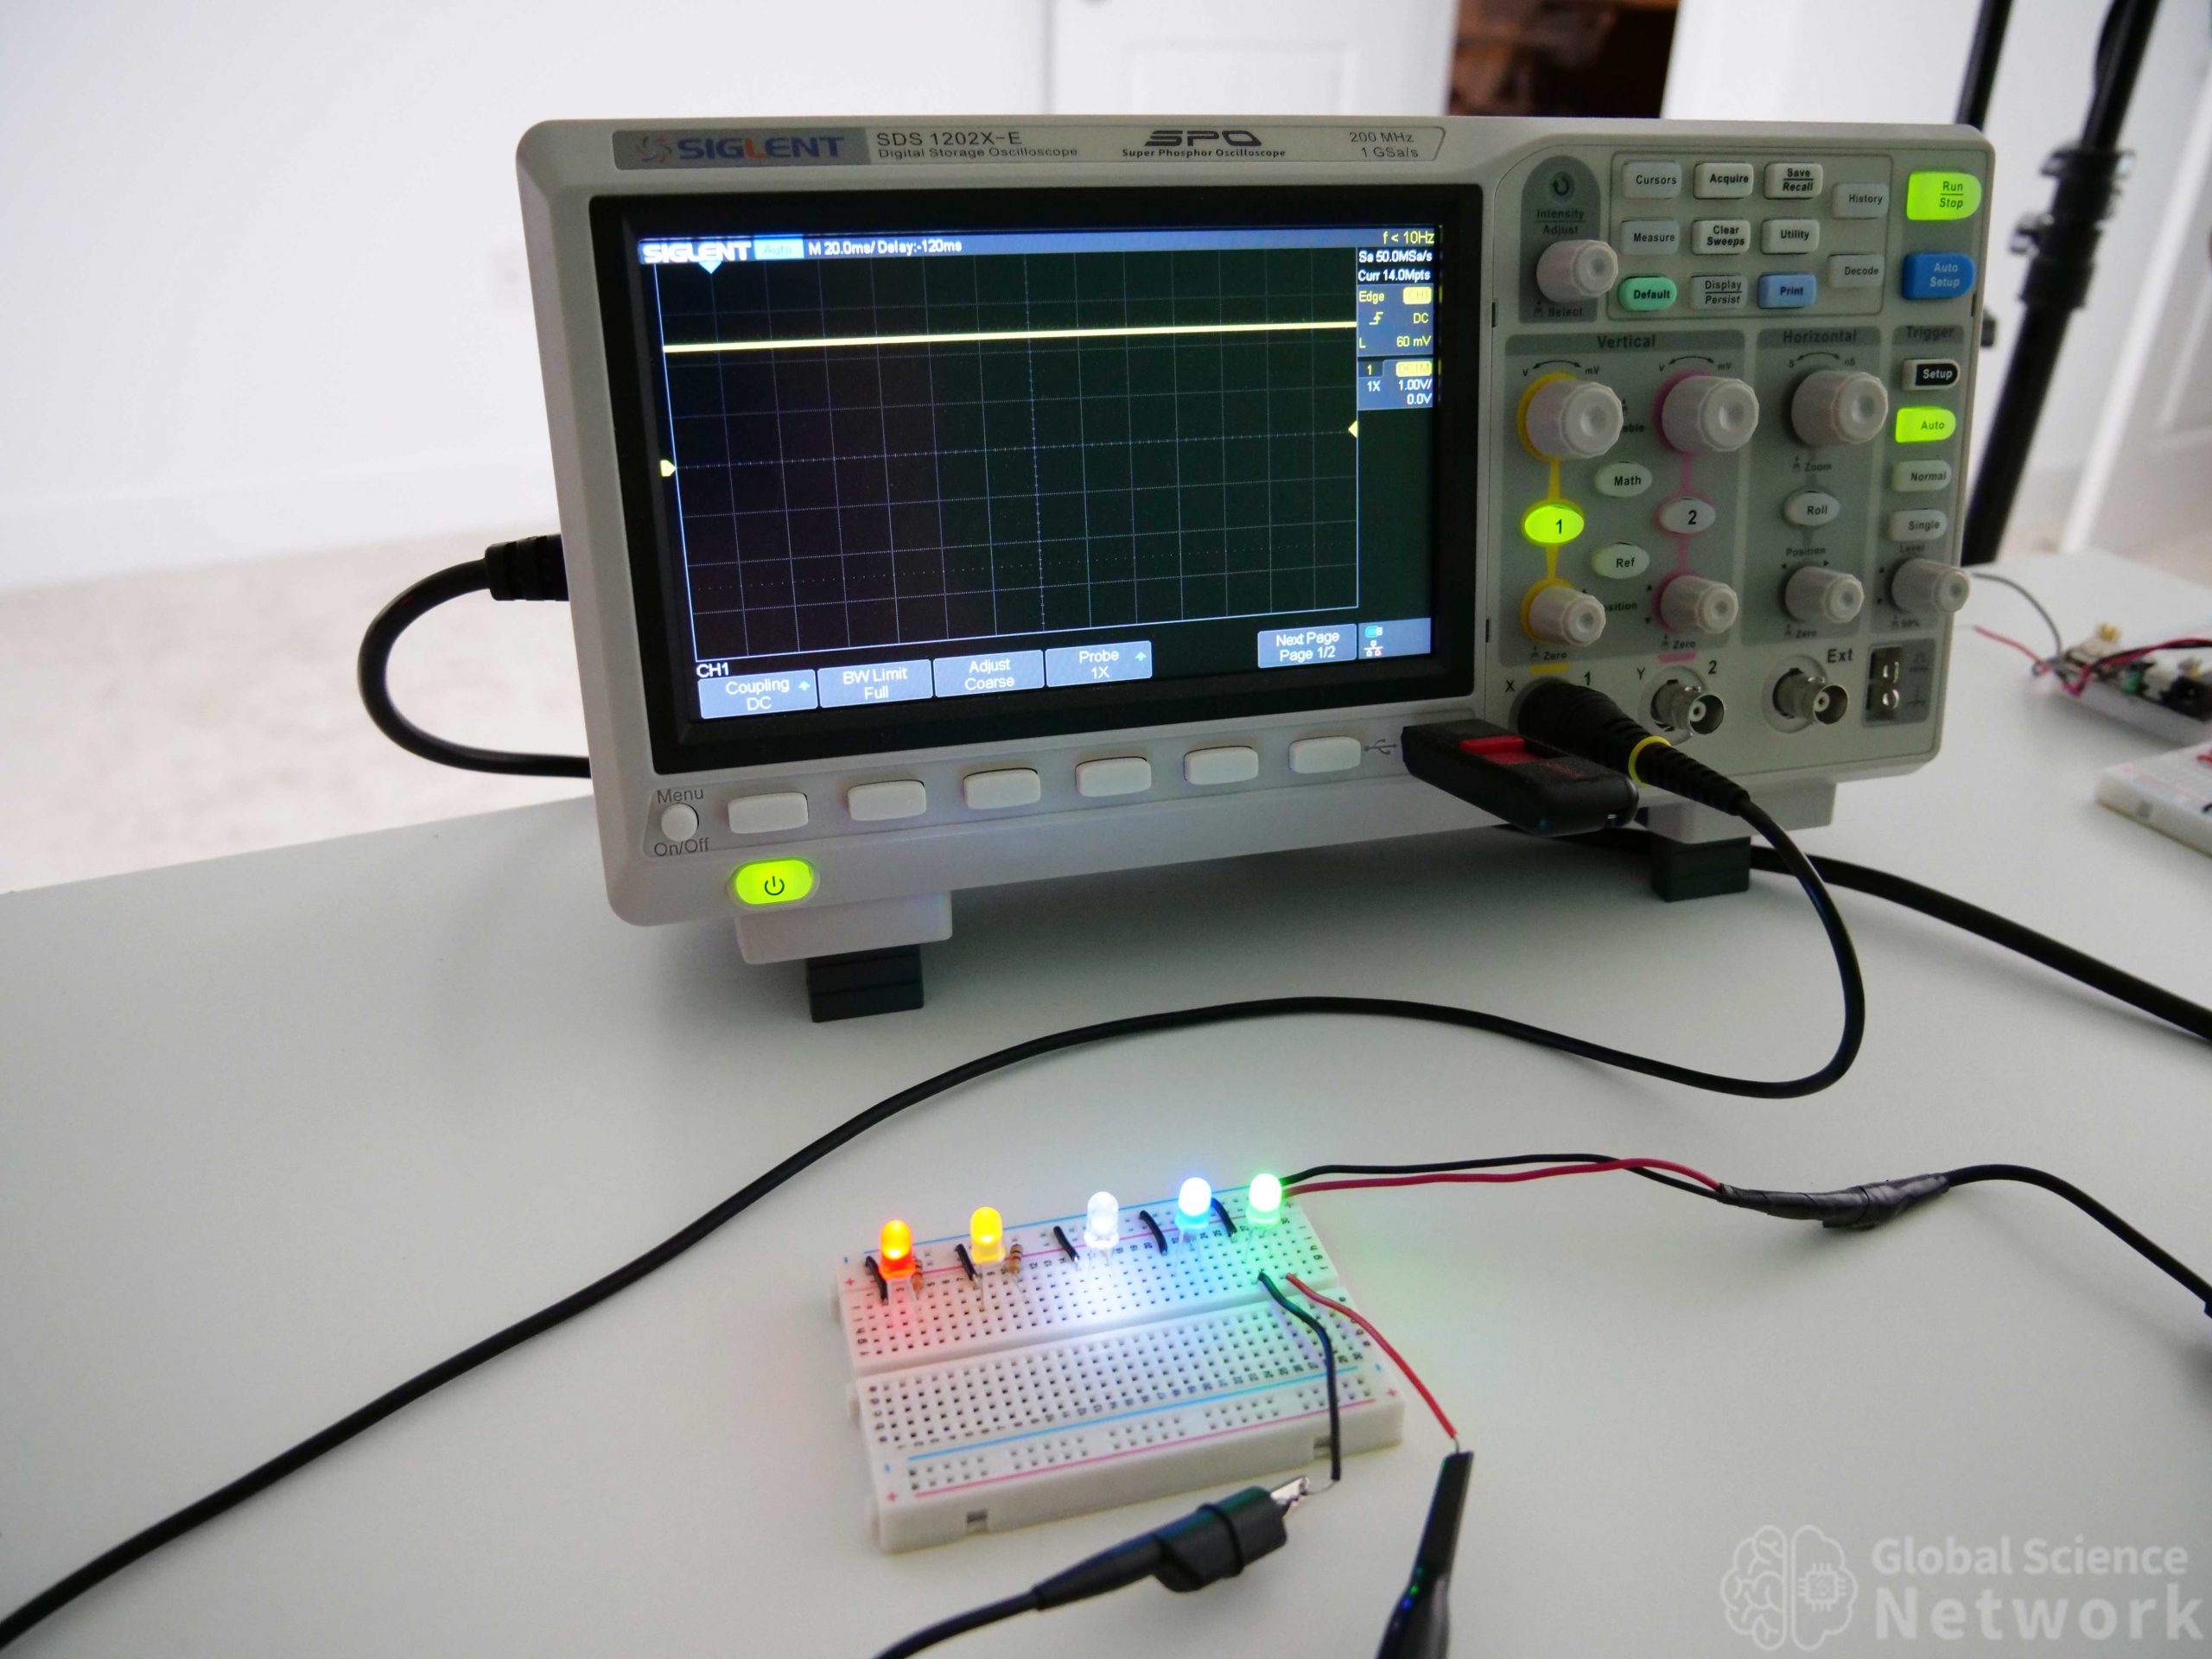 green LED with the voltage drop measured on an oscilloscope